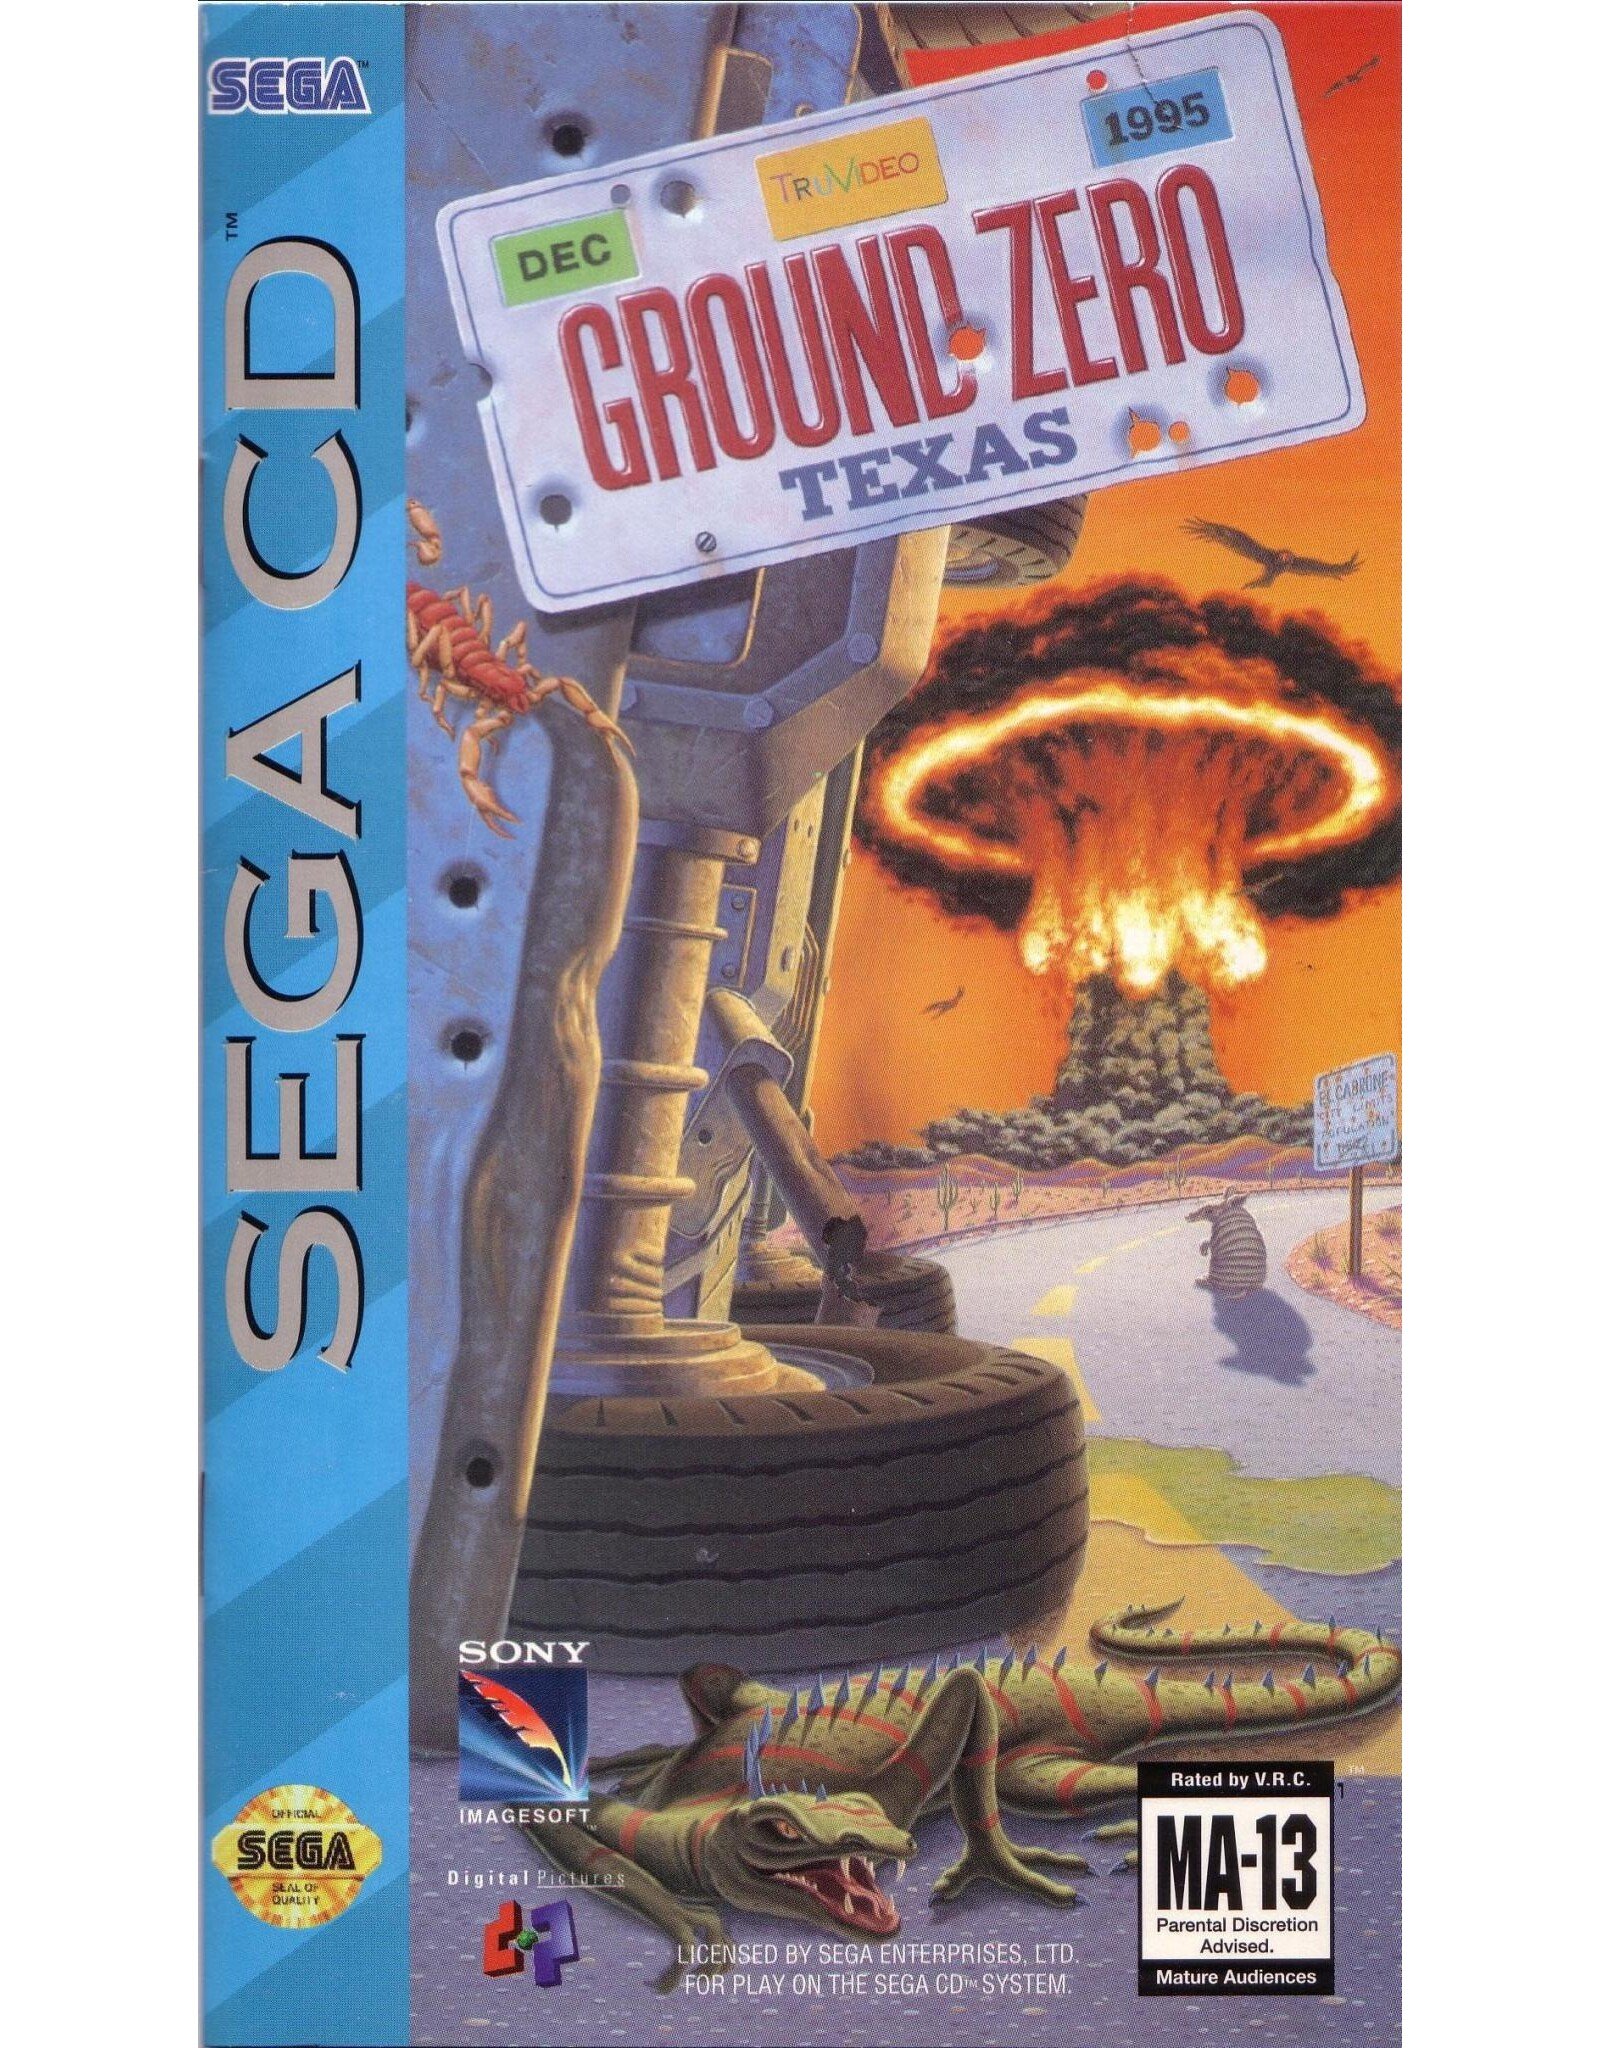 Sega CD Ground Zero Texas (Boxed with OEM Second Disc Tray, No Manual, Damaged Case)